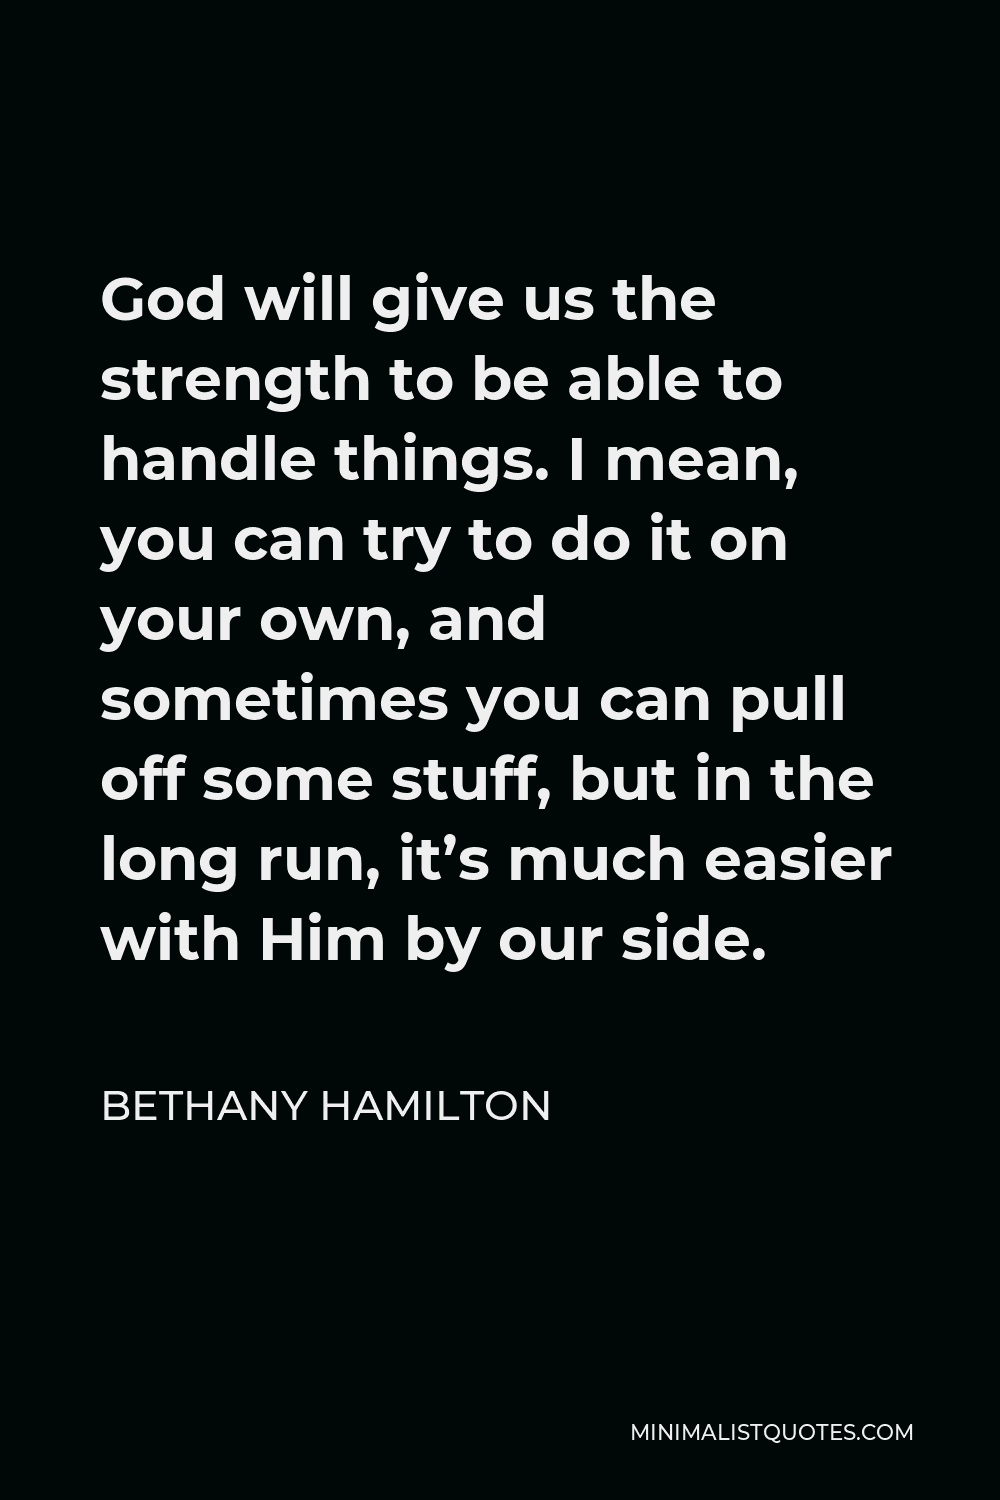 Bethany Hamilton Quote - God will give us the strength to be able to handle things. I mean, you can try to do it on your own, and sometimes you can pull off some stuff, but in the long run, it’s much easier with Him by our side.